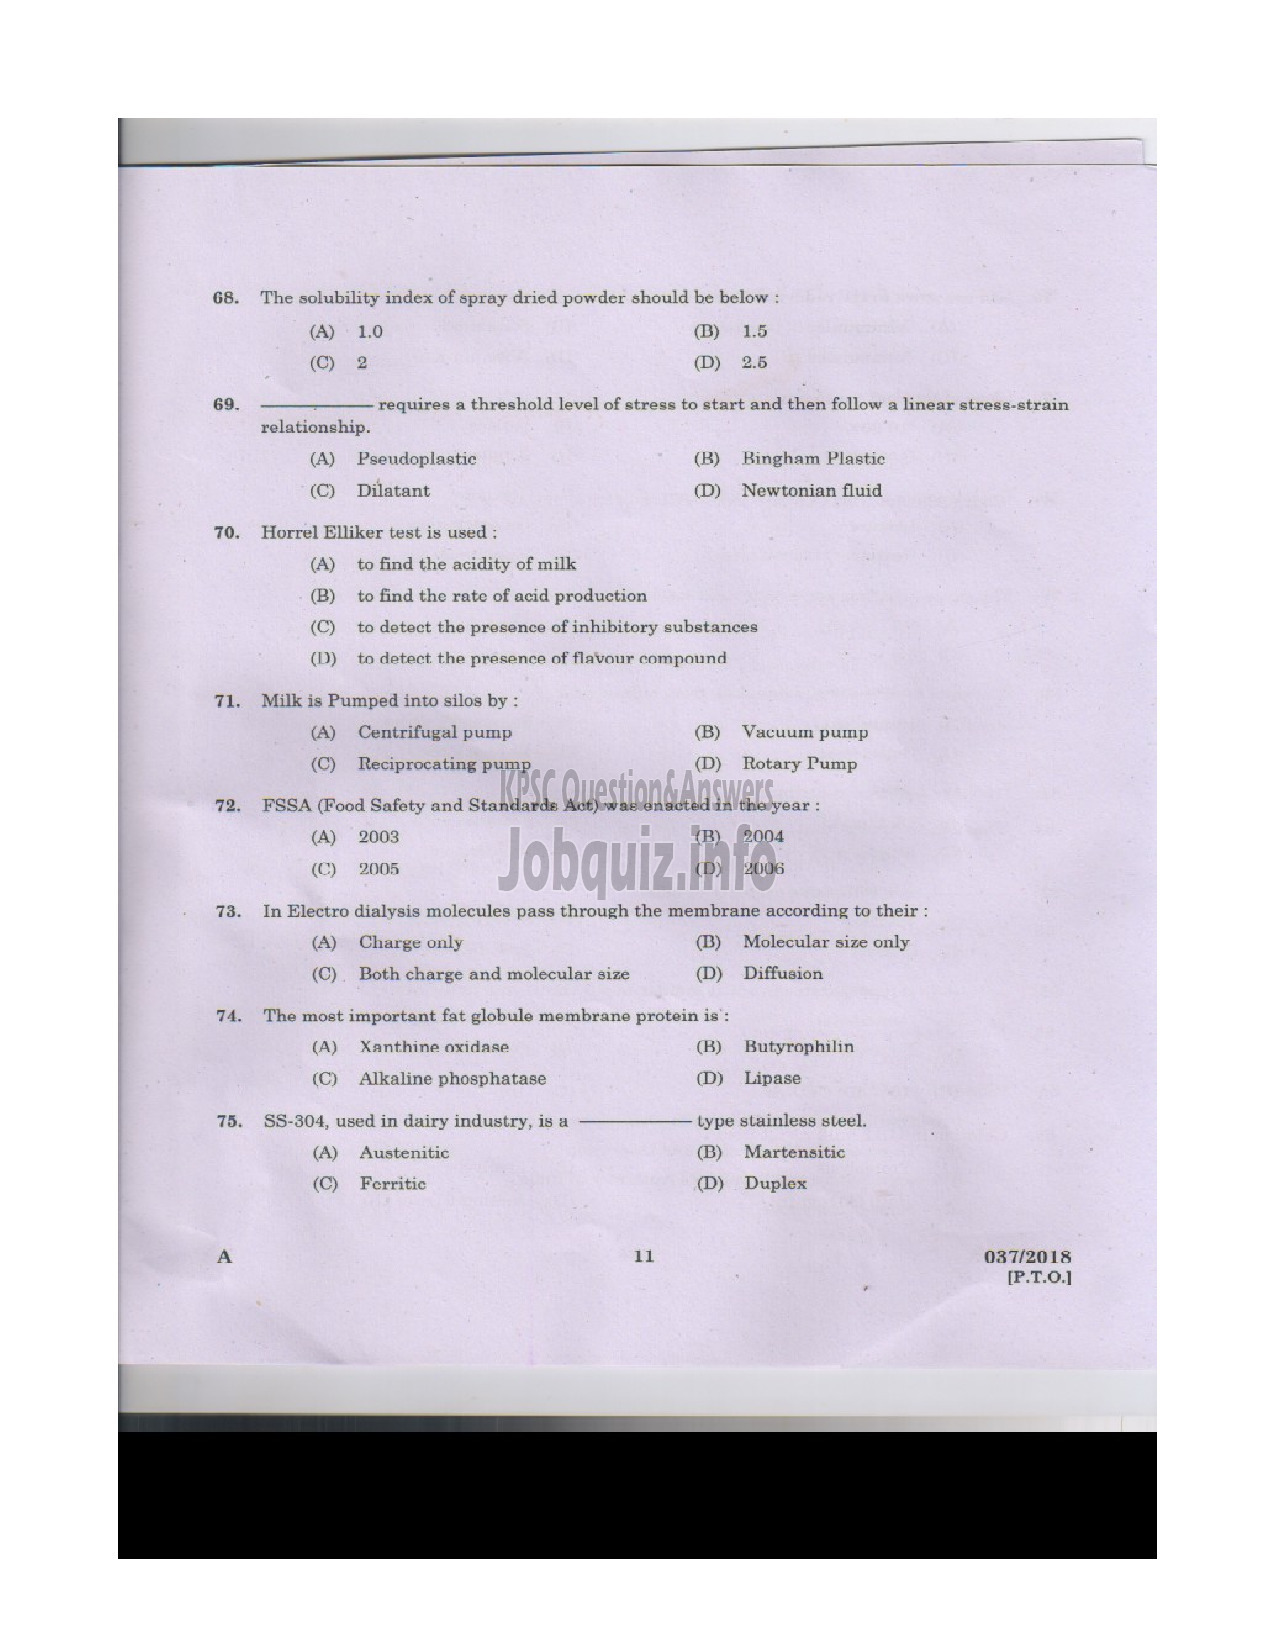 Kerala PSC Question Paper - VOCATIONAL INSTRUCTOR IN DAIRYING MILK PRODUCTS VHSE-10